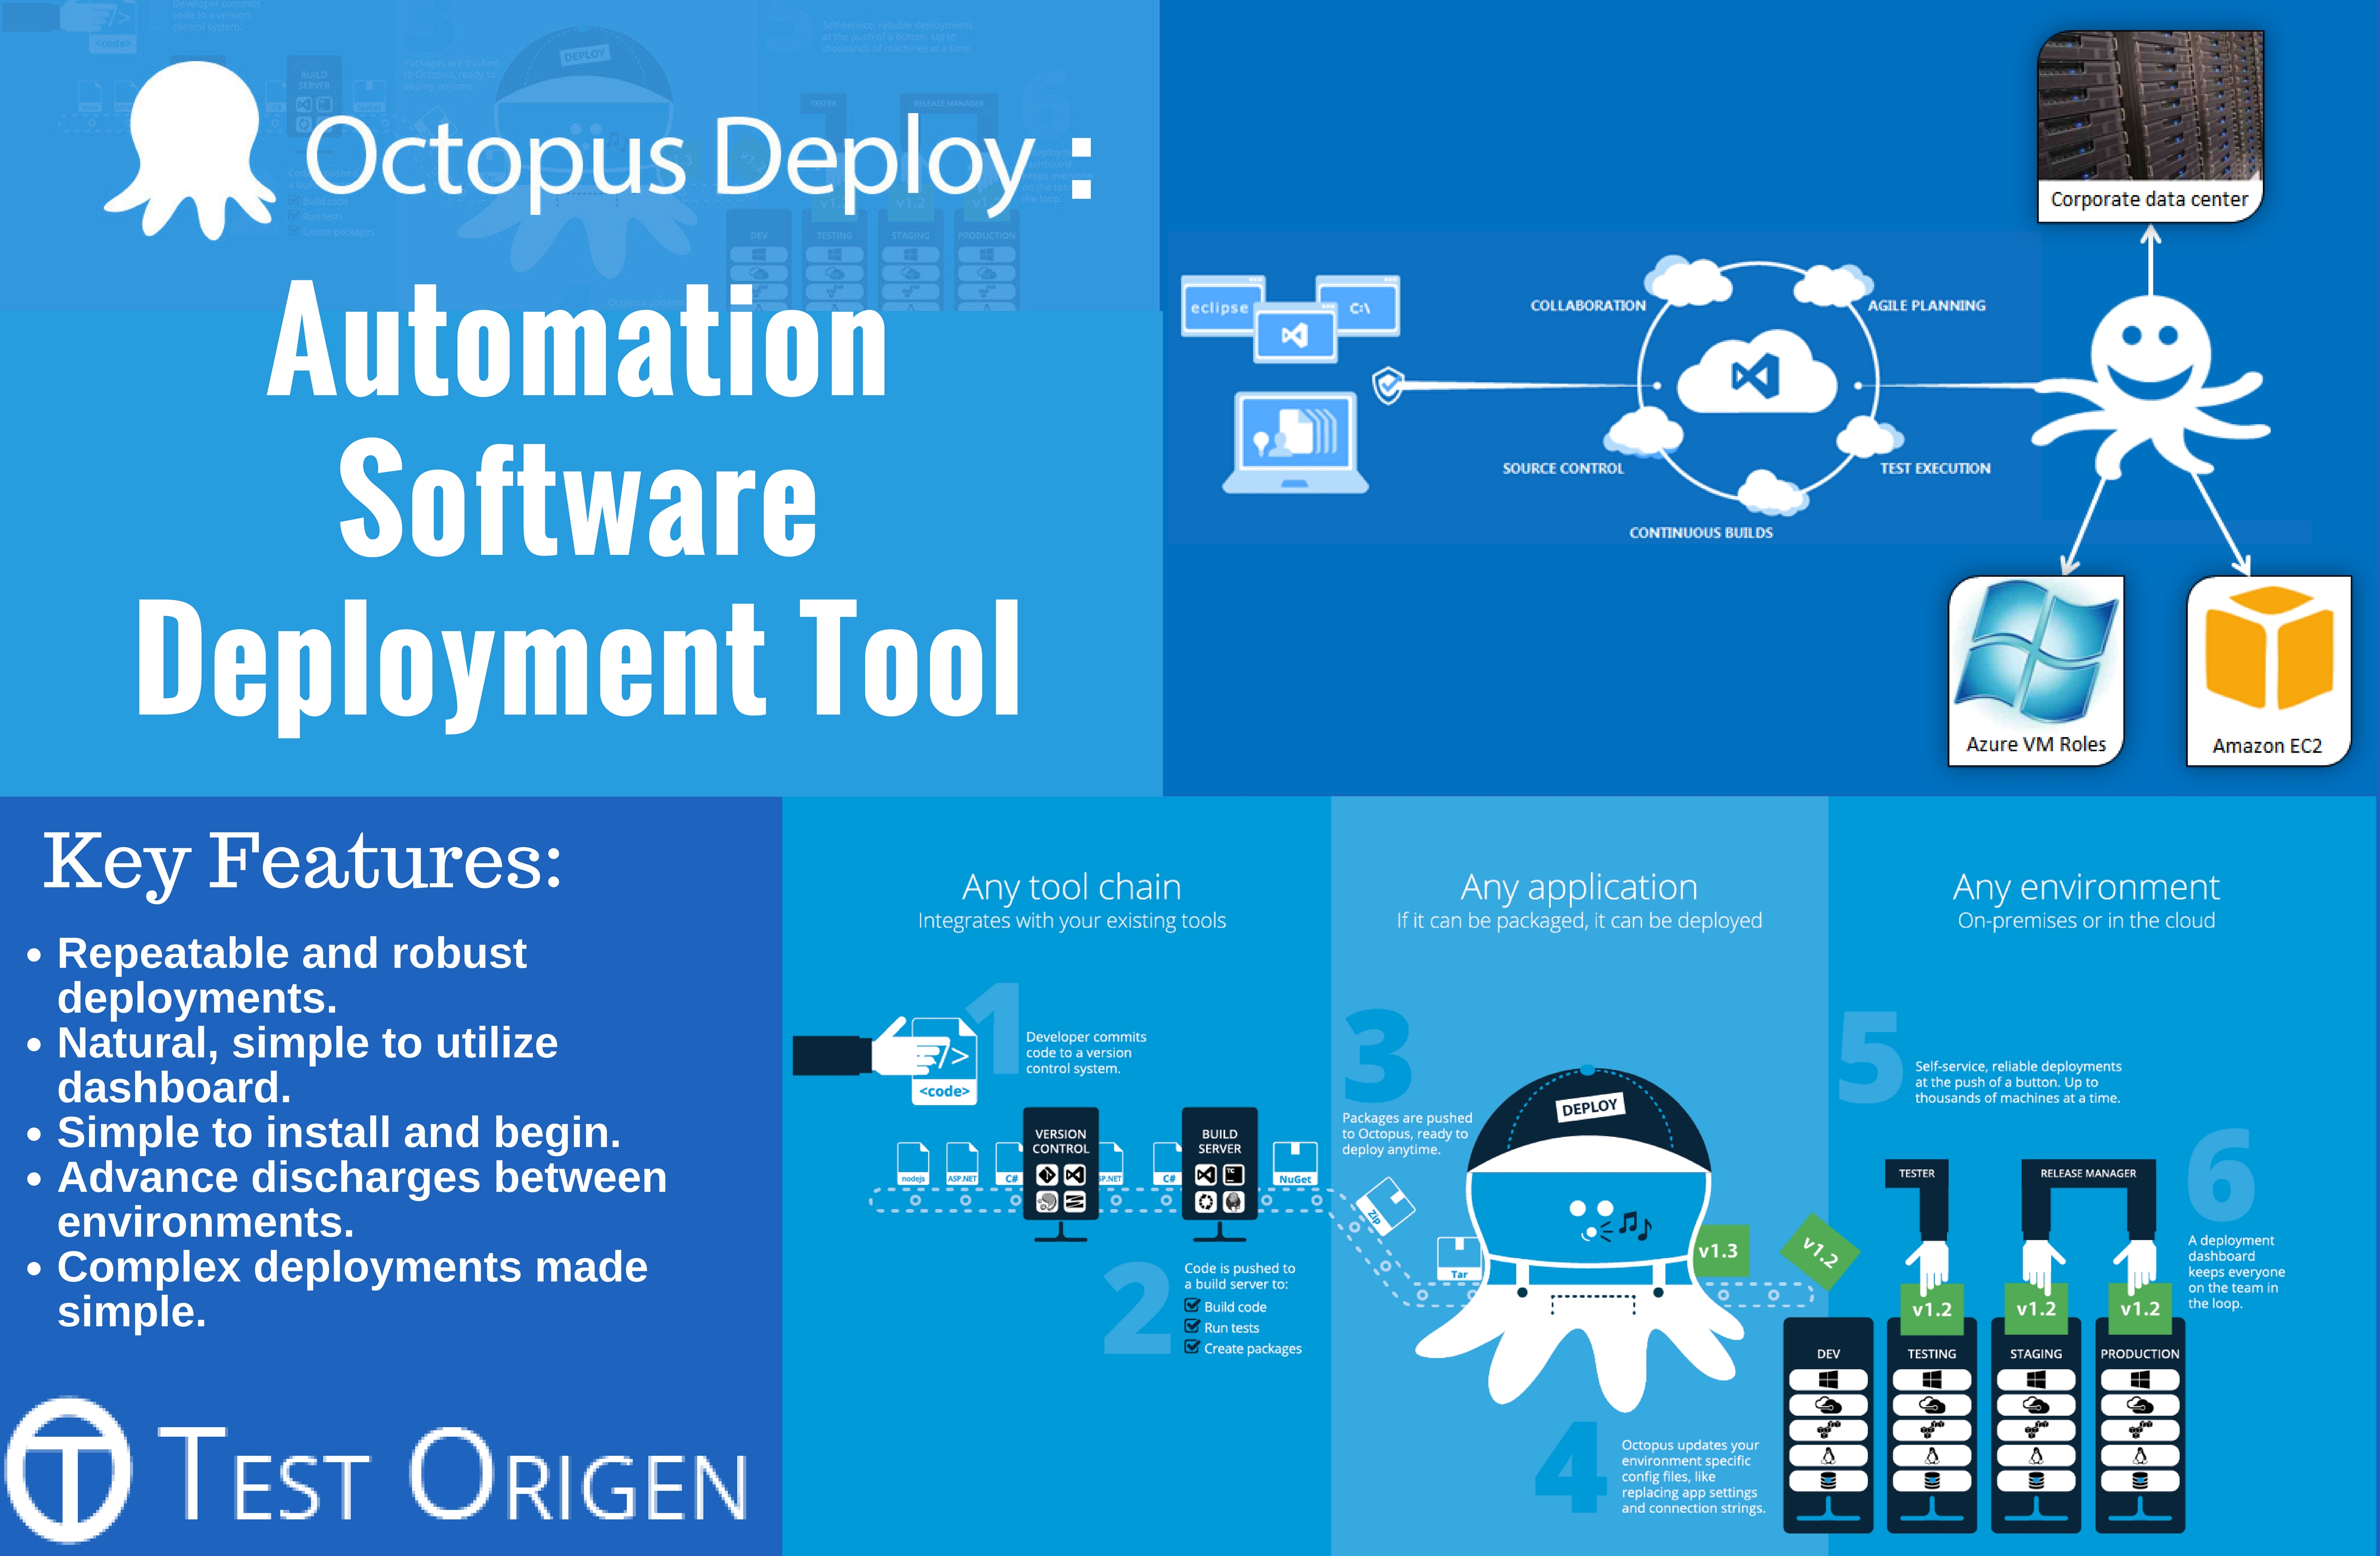 Octopus: Automation Software Deployment Tool